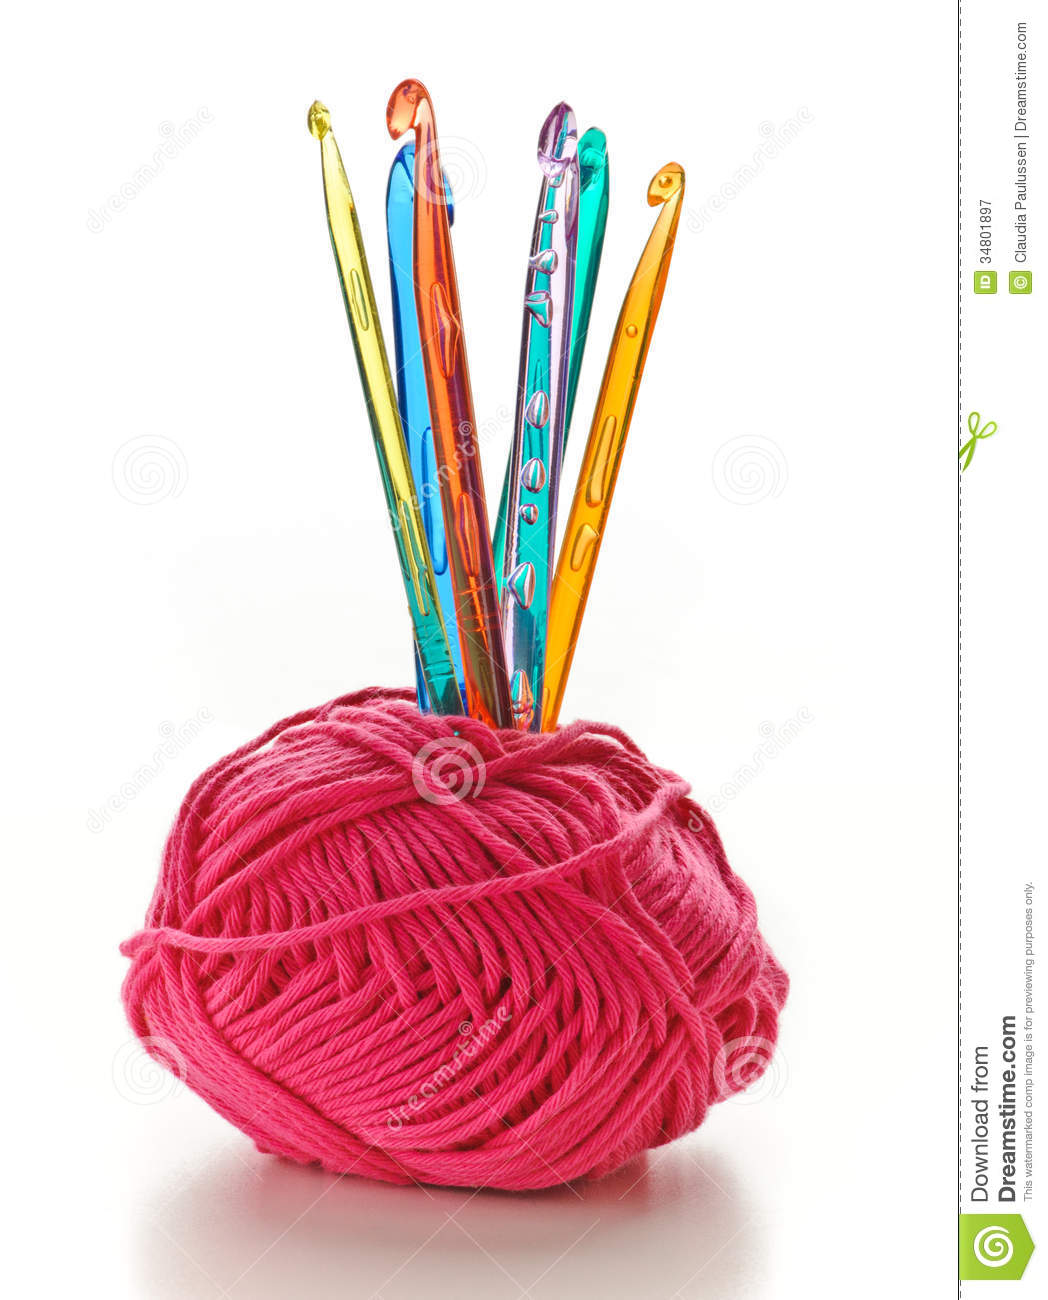 Crochet Hooks With A Ball Of Wool Royalty Free Stock Photography